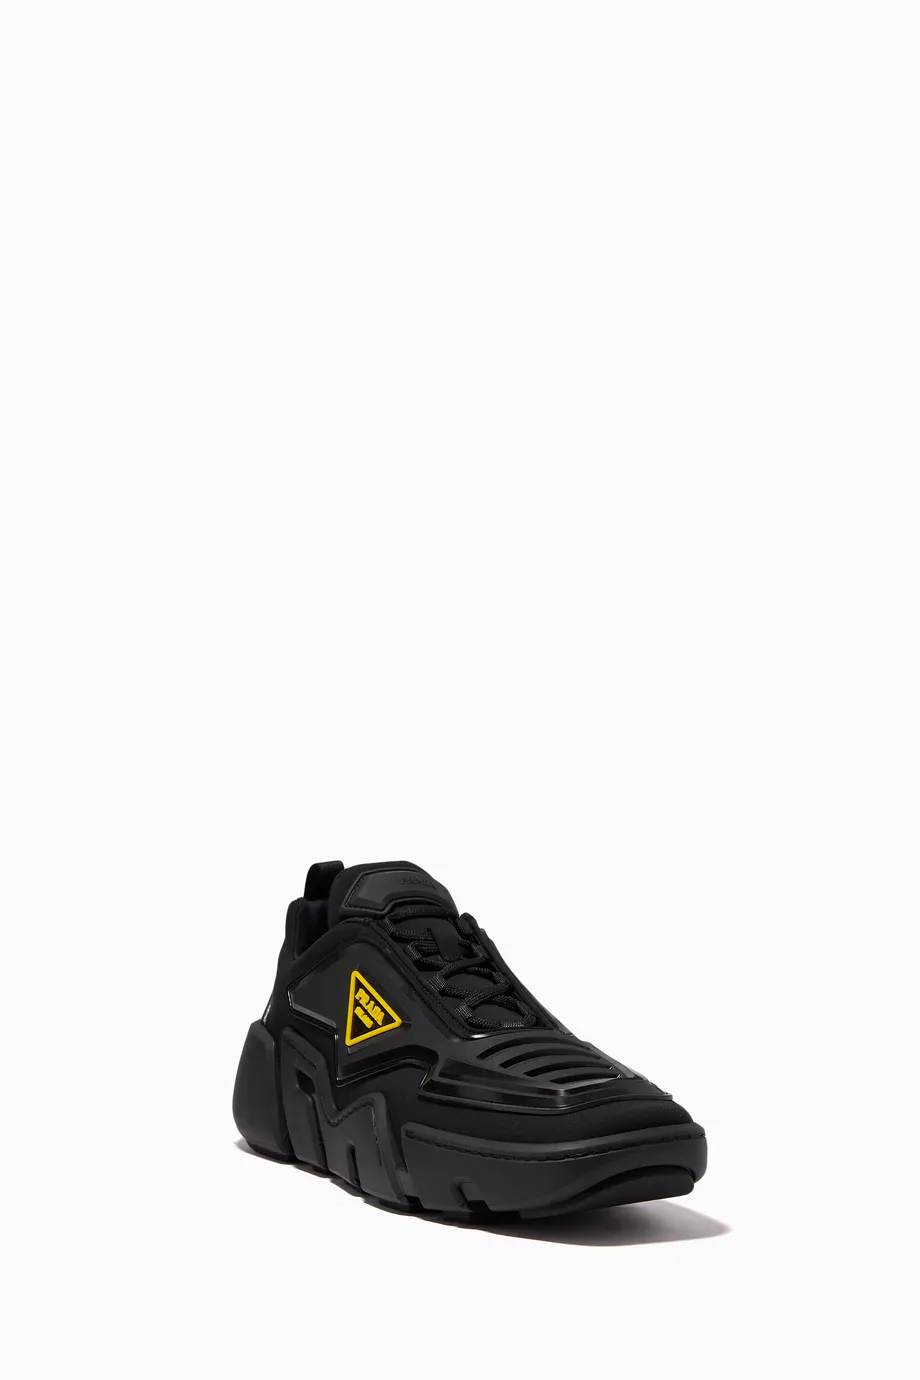 PRADA TECHNO STRETCH FABRIC SNEAKERS Price: 165$ The sporty design of these  sneakers blends with futuristic e…